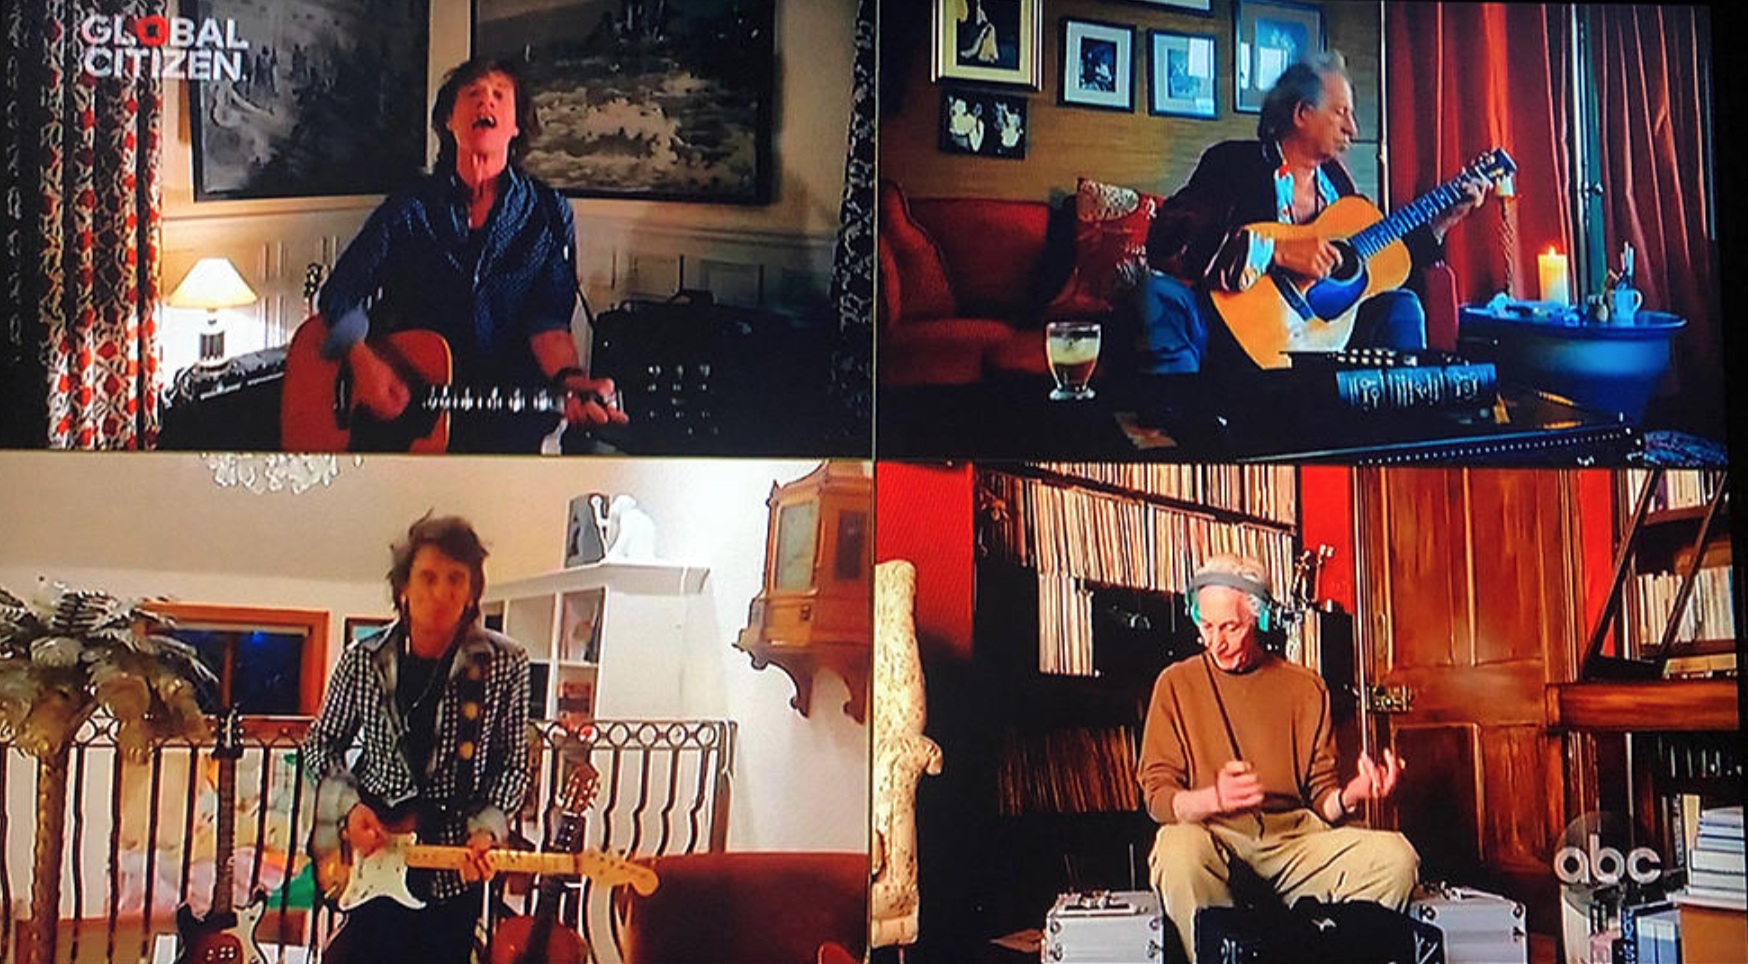 VIDEO: The Rolling Stones, Paul McCartney and Elton John Perform Live from their homes